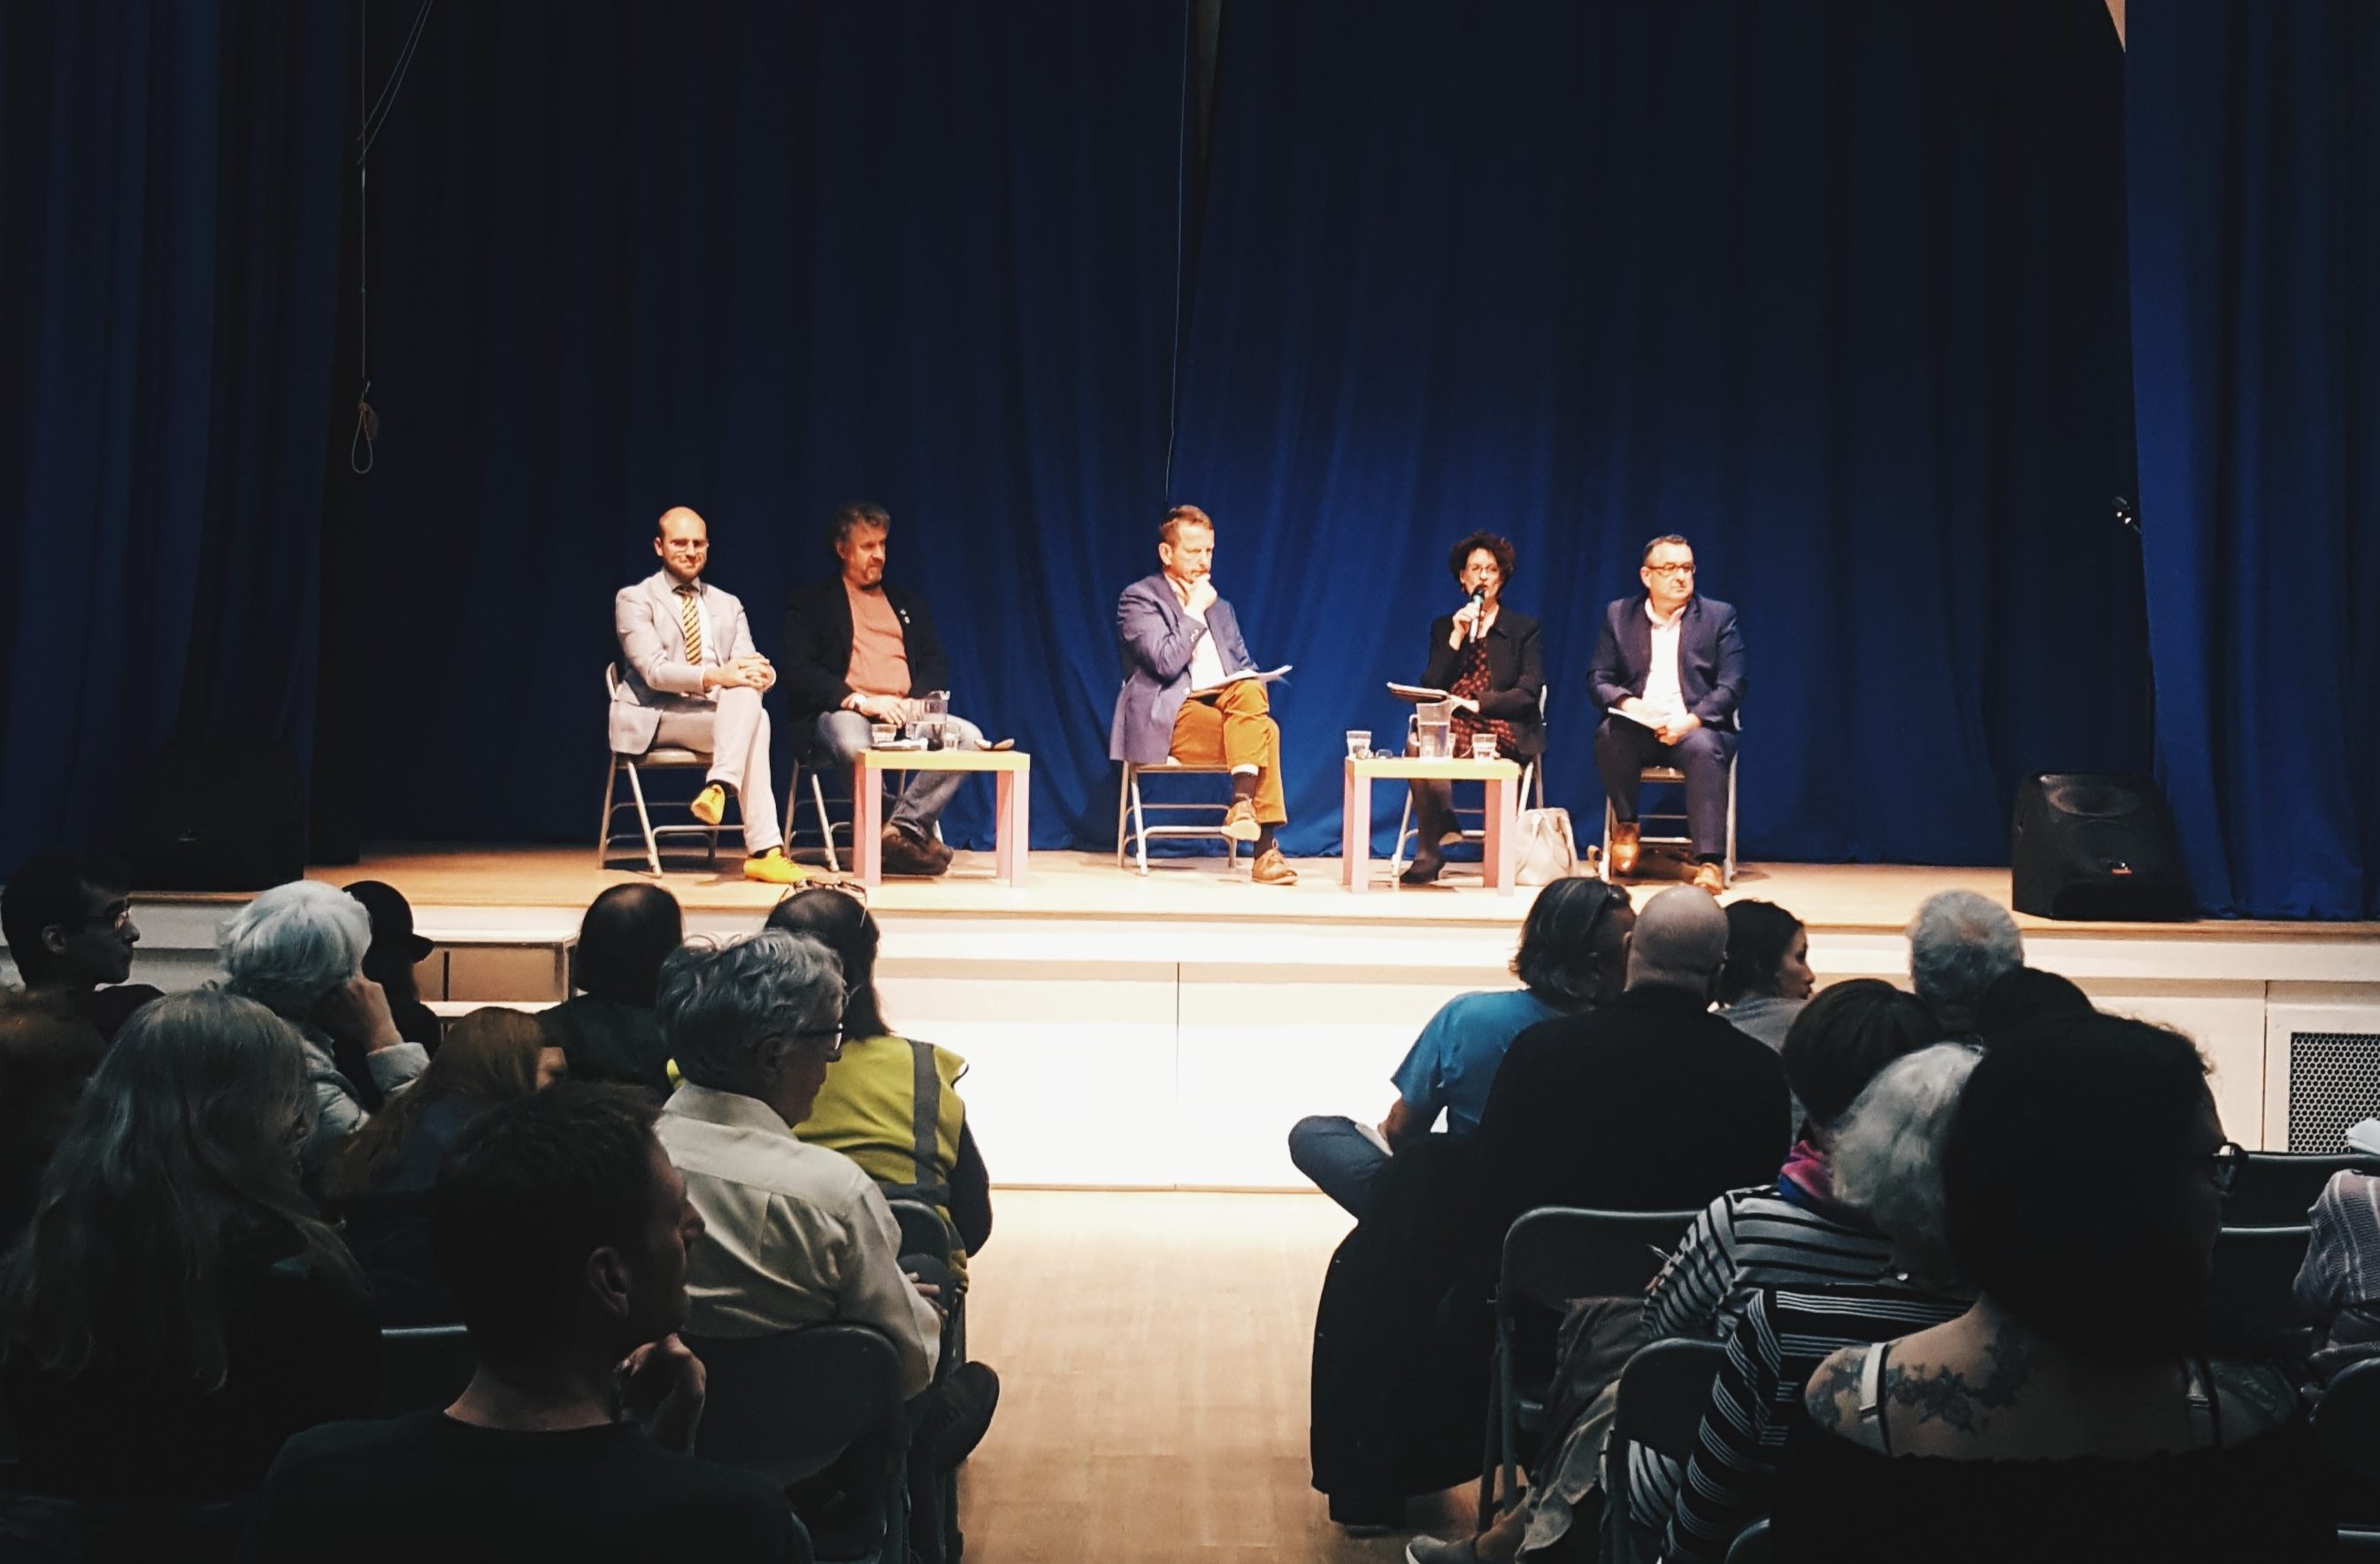 Candidates of major political parties commit to end Brighton & Hove Council’s use of pesticides if elected (Brighton & Hove Environment Hustings - April 2019)